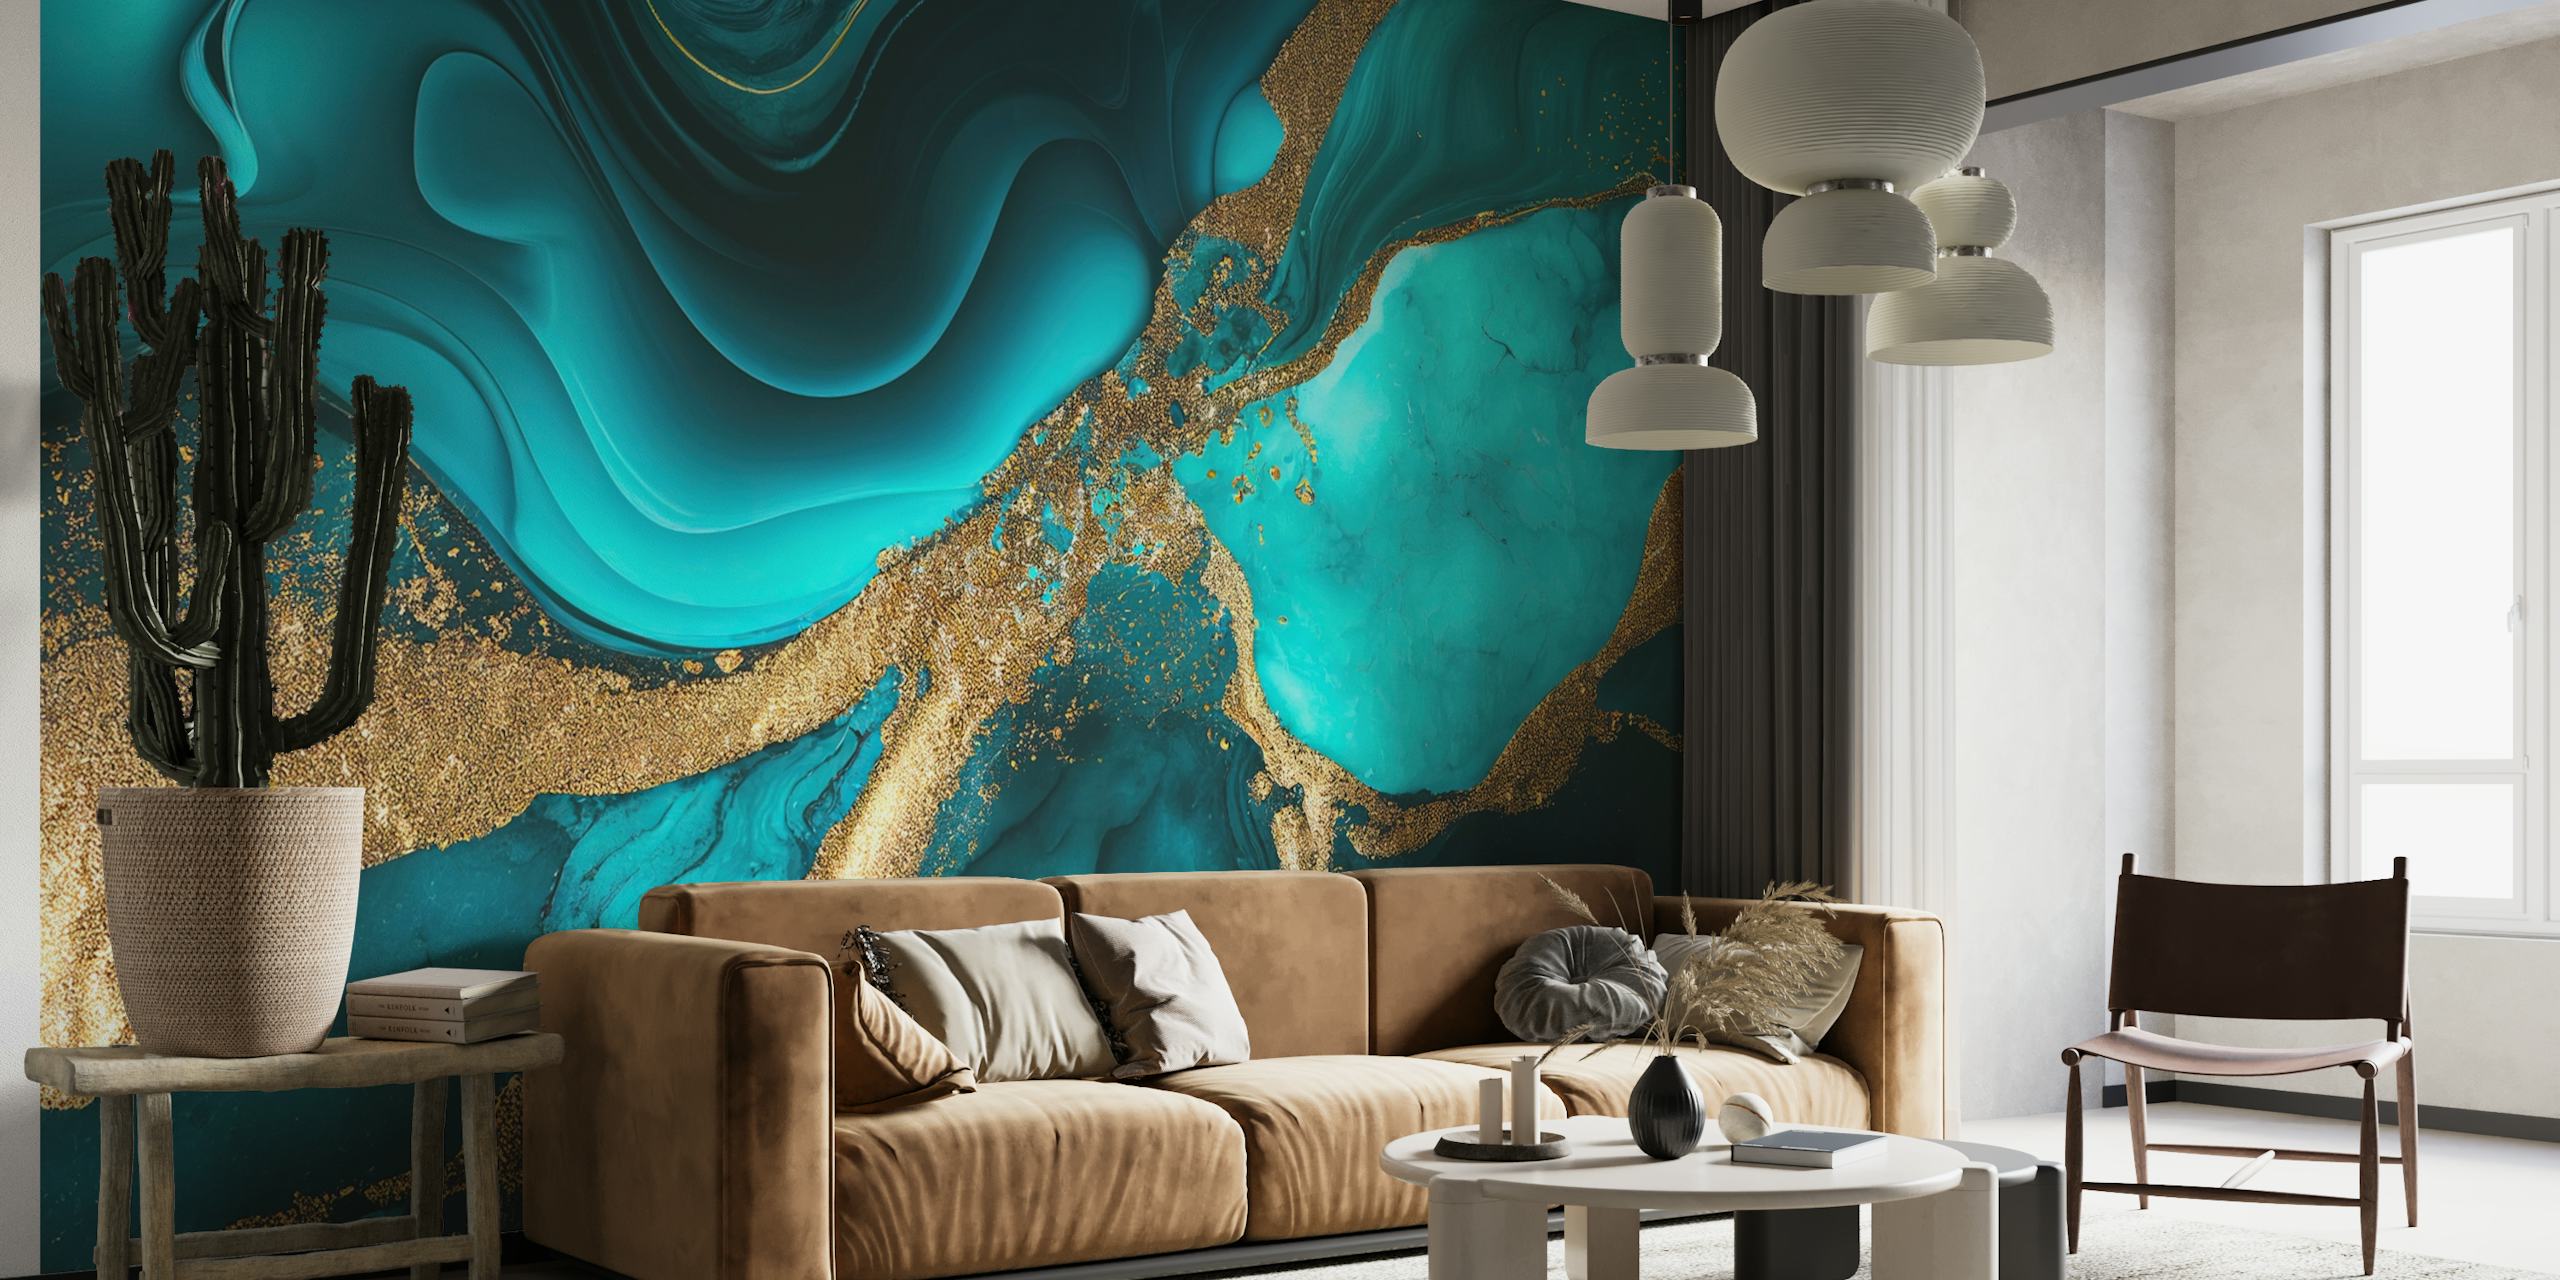 Faux marble wall mural in teal and gold swirls